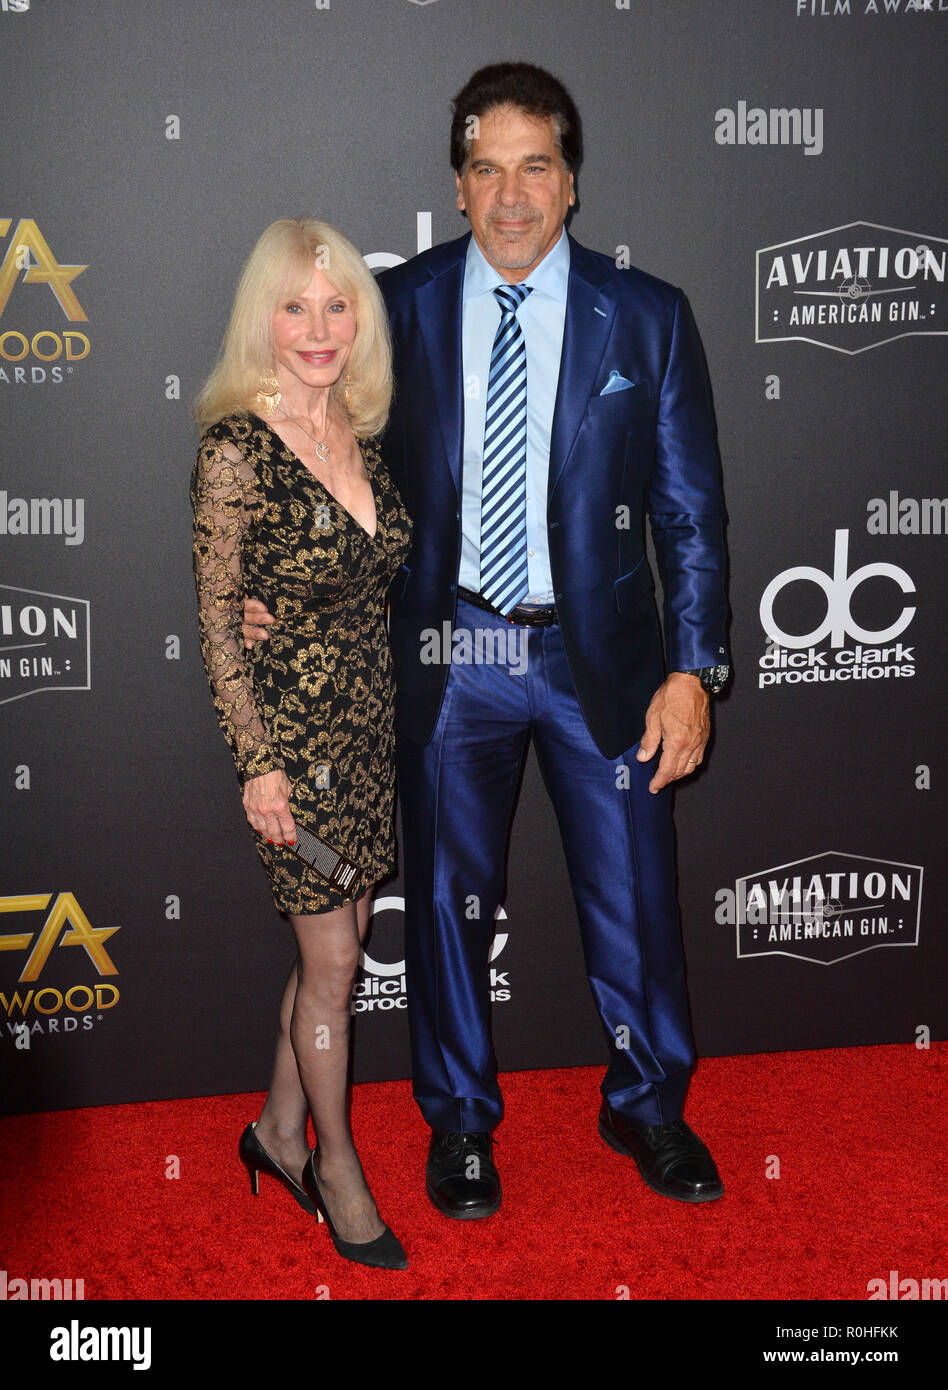 Los Angeles, USA. 04th Nov, 2018. LOS ANGELES, CA. November 04, 2018: Lou Ferrigno & Carla Ferrigno at the 22nd Annual Hollywood Film Awards at the Beverly Hilton Hotel. Picture Credit: Paul Smith/Alamy Live News Stock Photo